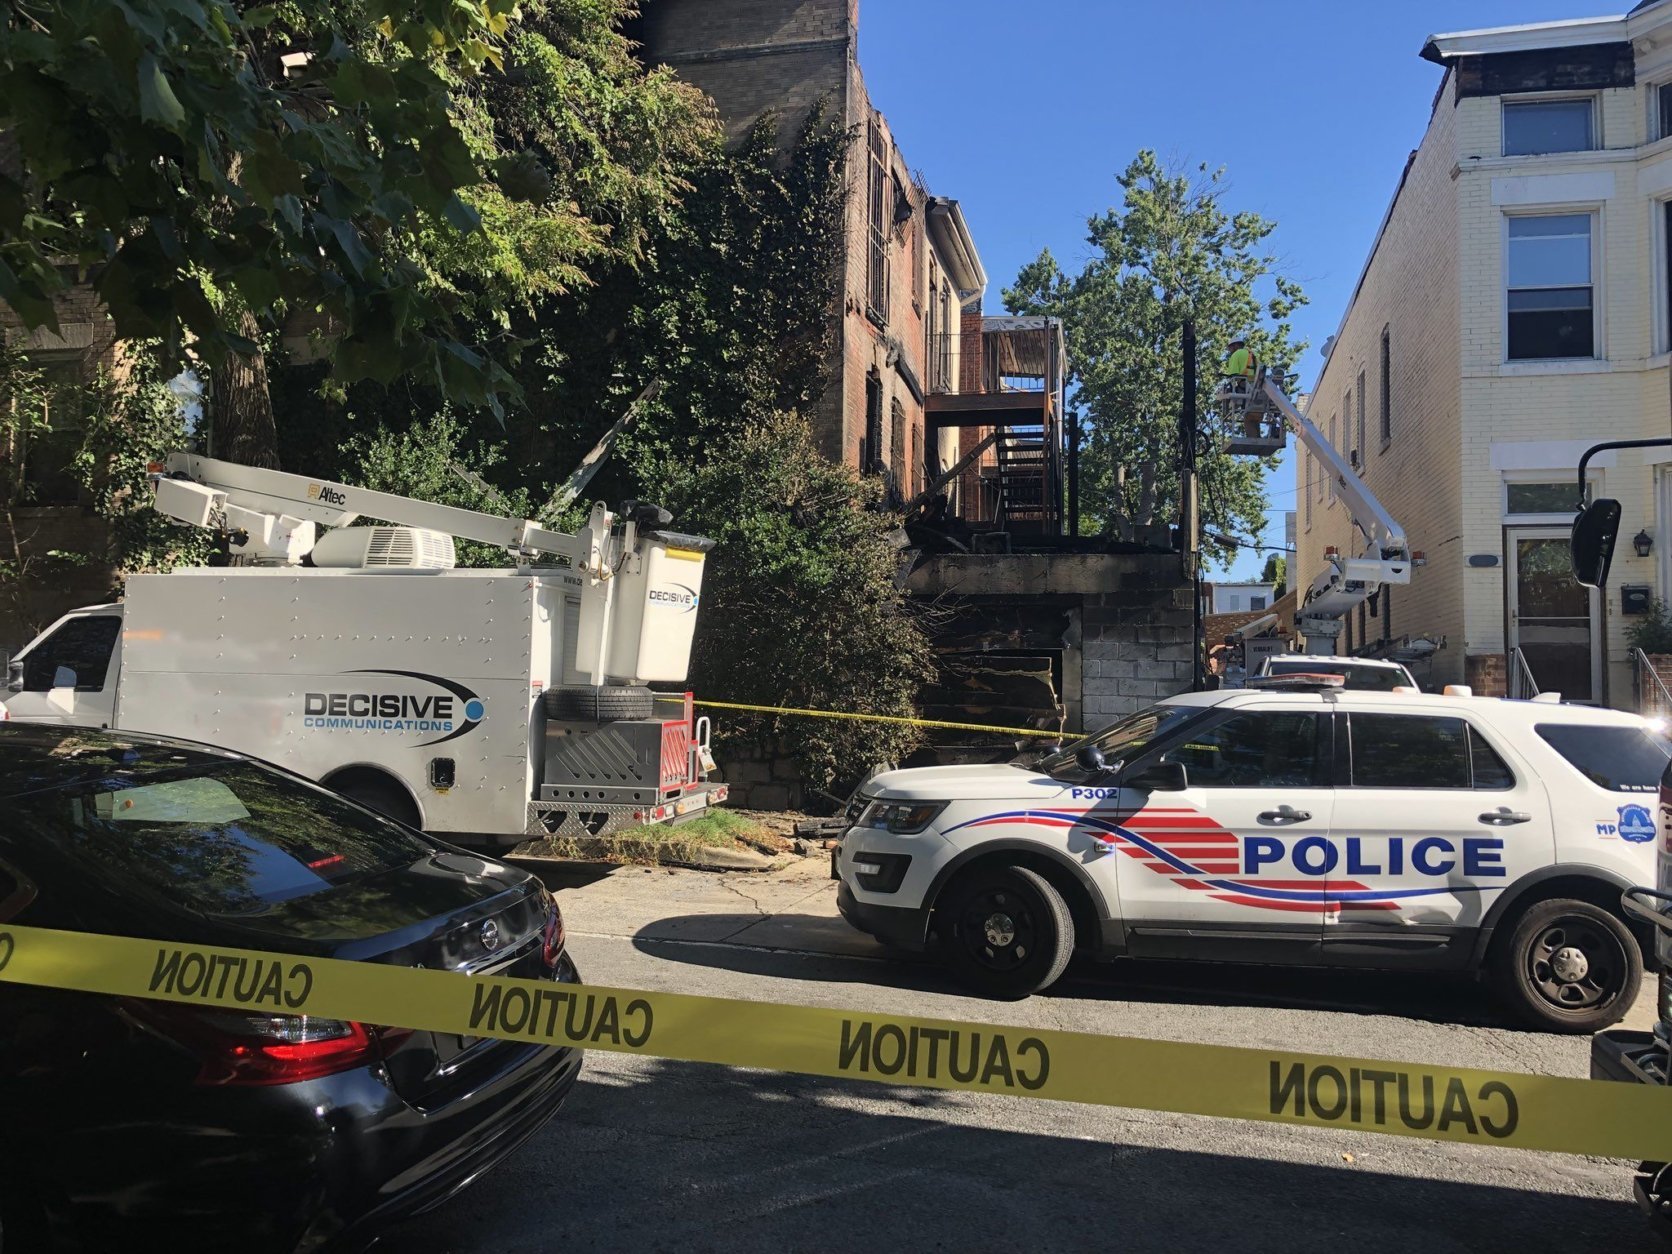 Although the fire alarms went off, officials say yelling from neighbors helped get the family, including three children, out before the structure was engulfed by flames. (WTOP/Melissa Howell)